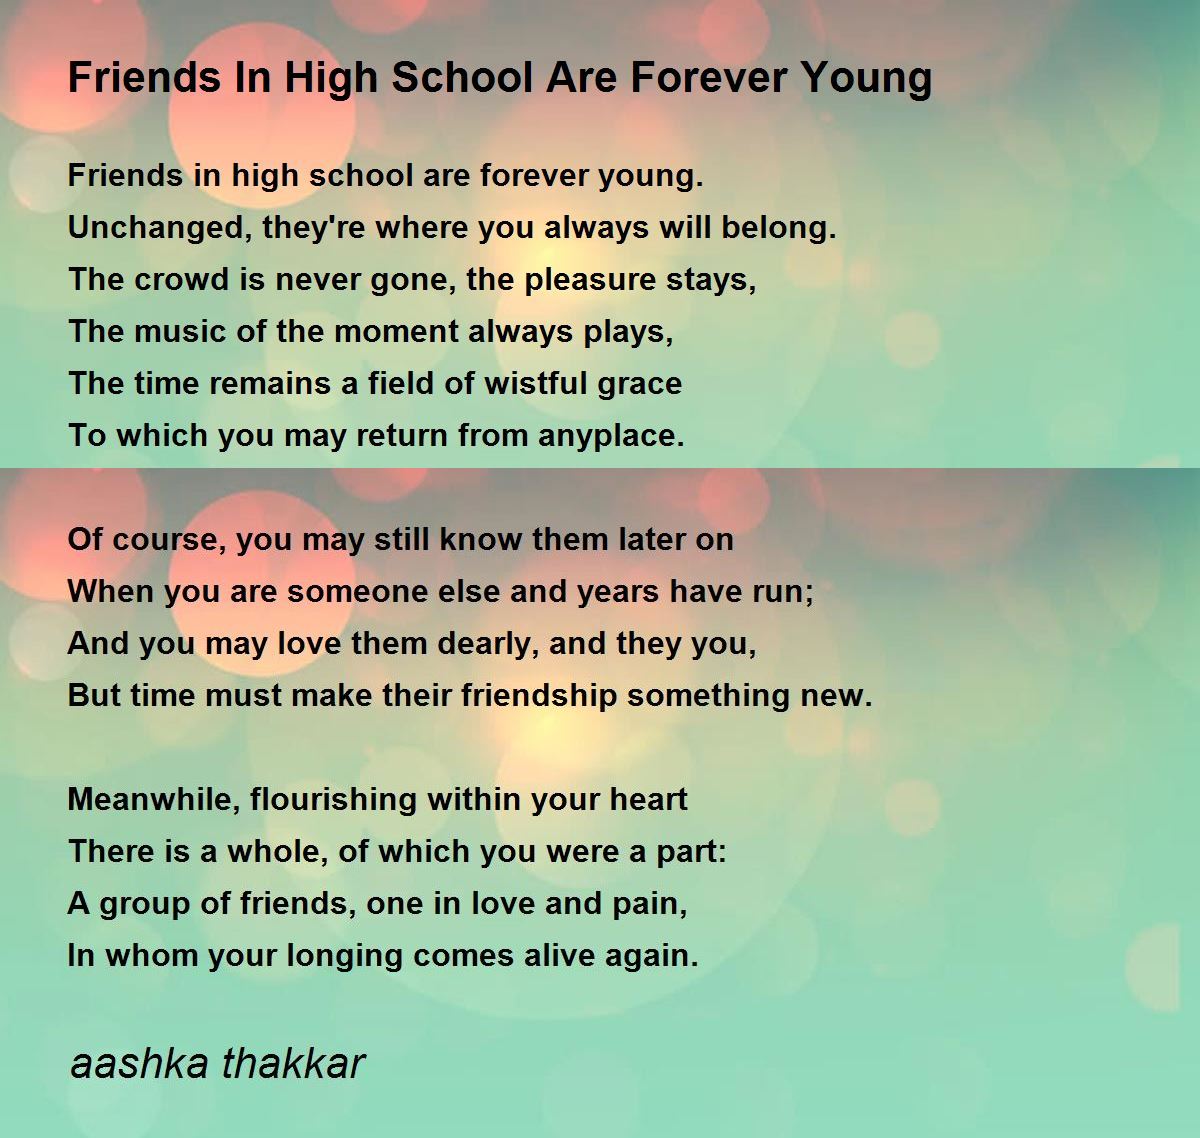 Friends In High School Are Forever Young - Friends In High School ...